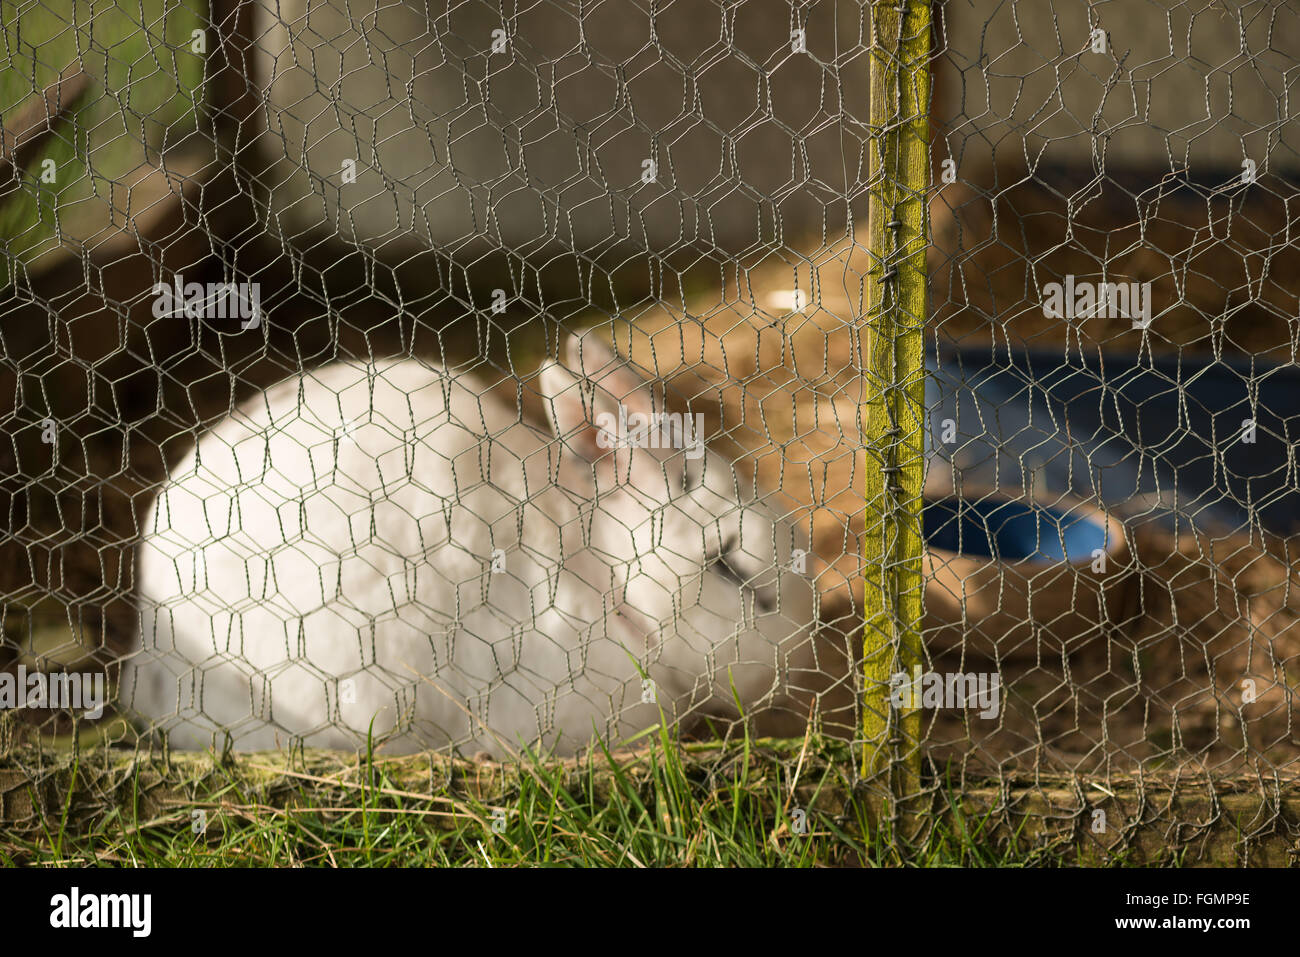 beloved home pet rabbit caged in outside run on grass with chicken wire to protect from foxes on lawn and grass Stock Photo